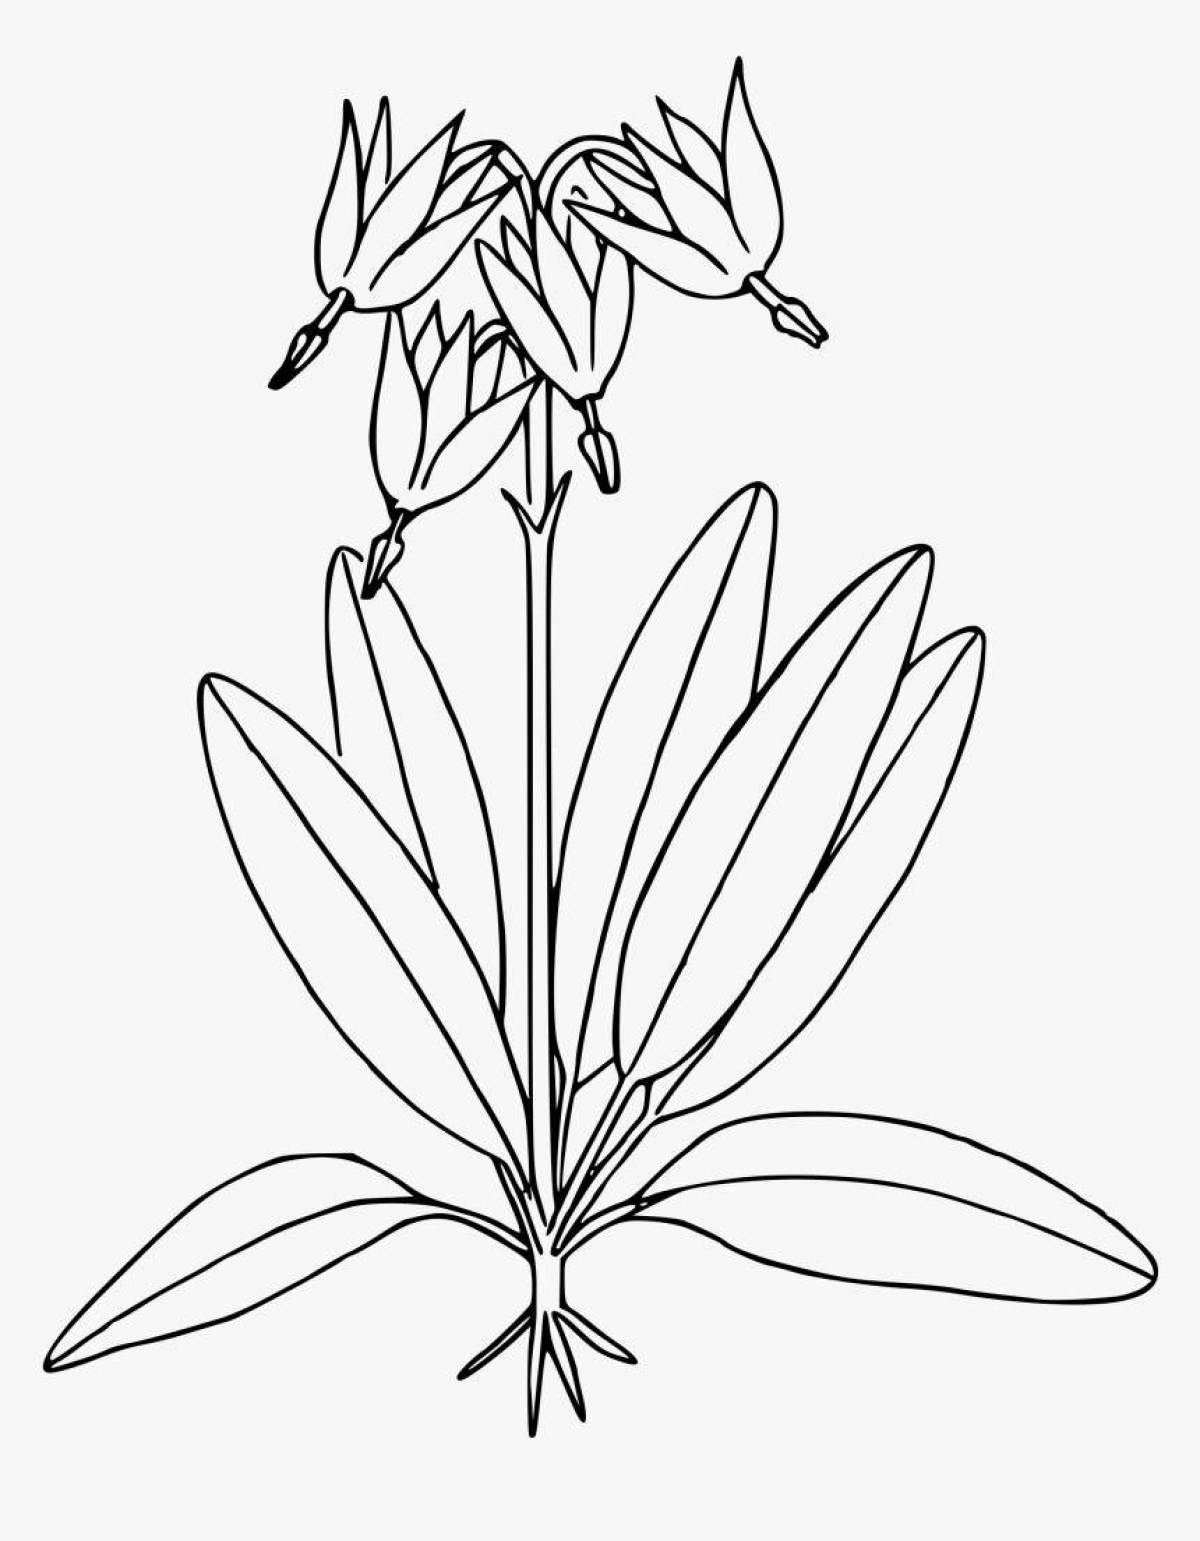 Awesome botany coloring page